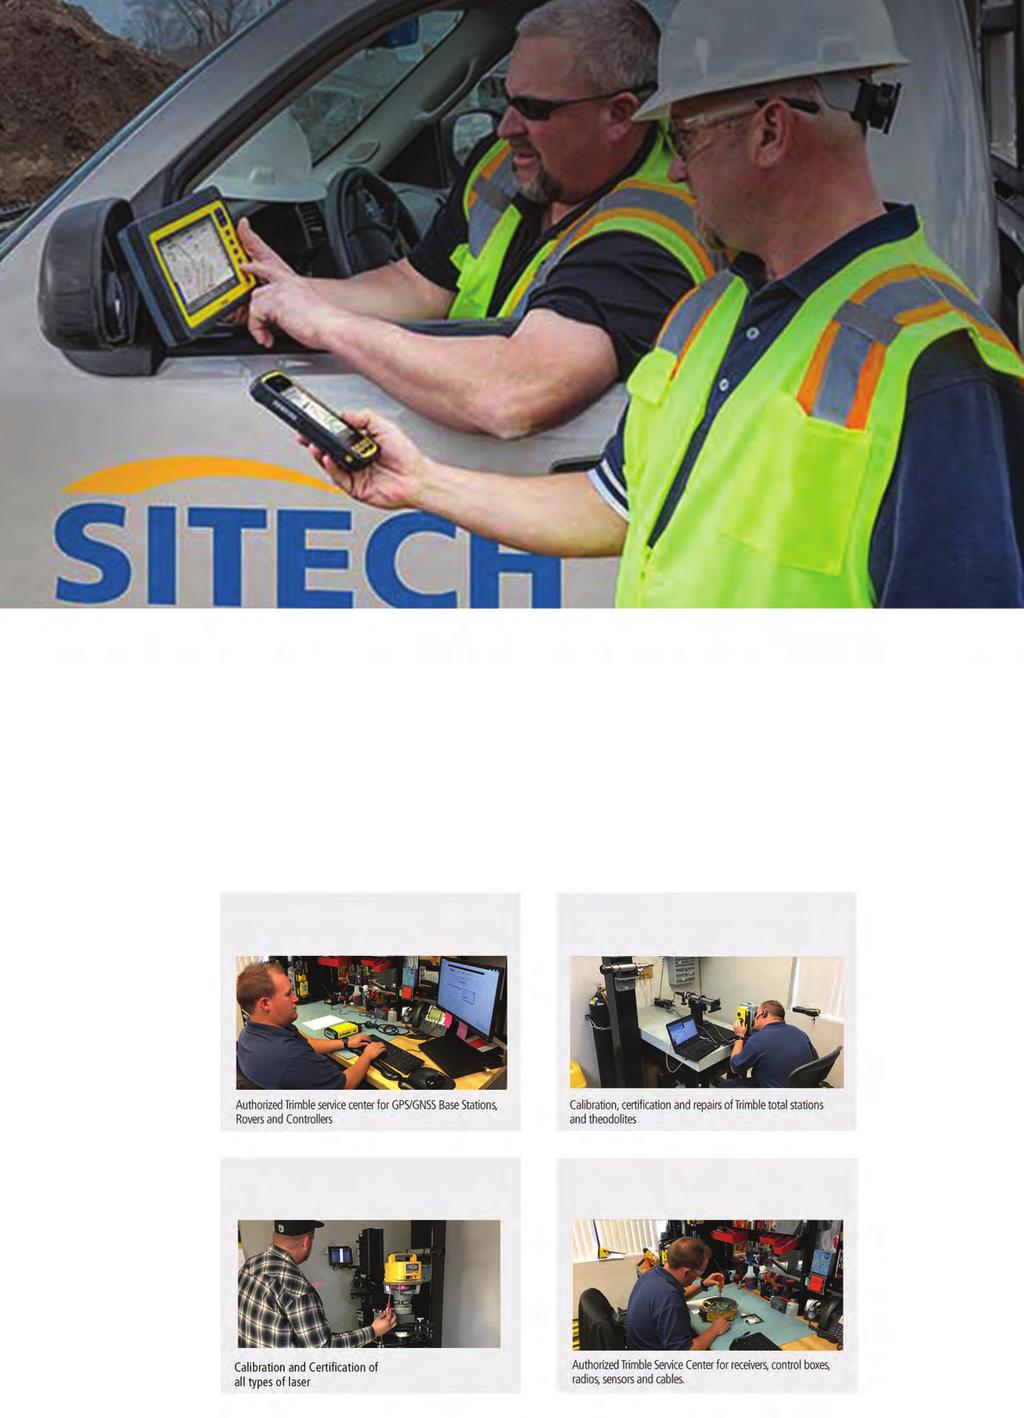 SITECH INTERMOUNTAIN SERVICE CENTER SITECH Intermountain maintains a Trimble/Spectra Precision Level 3 Factory Authorized service center capable of servicing all your construction laser, GPS and